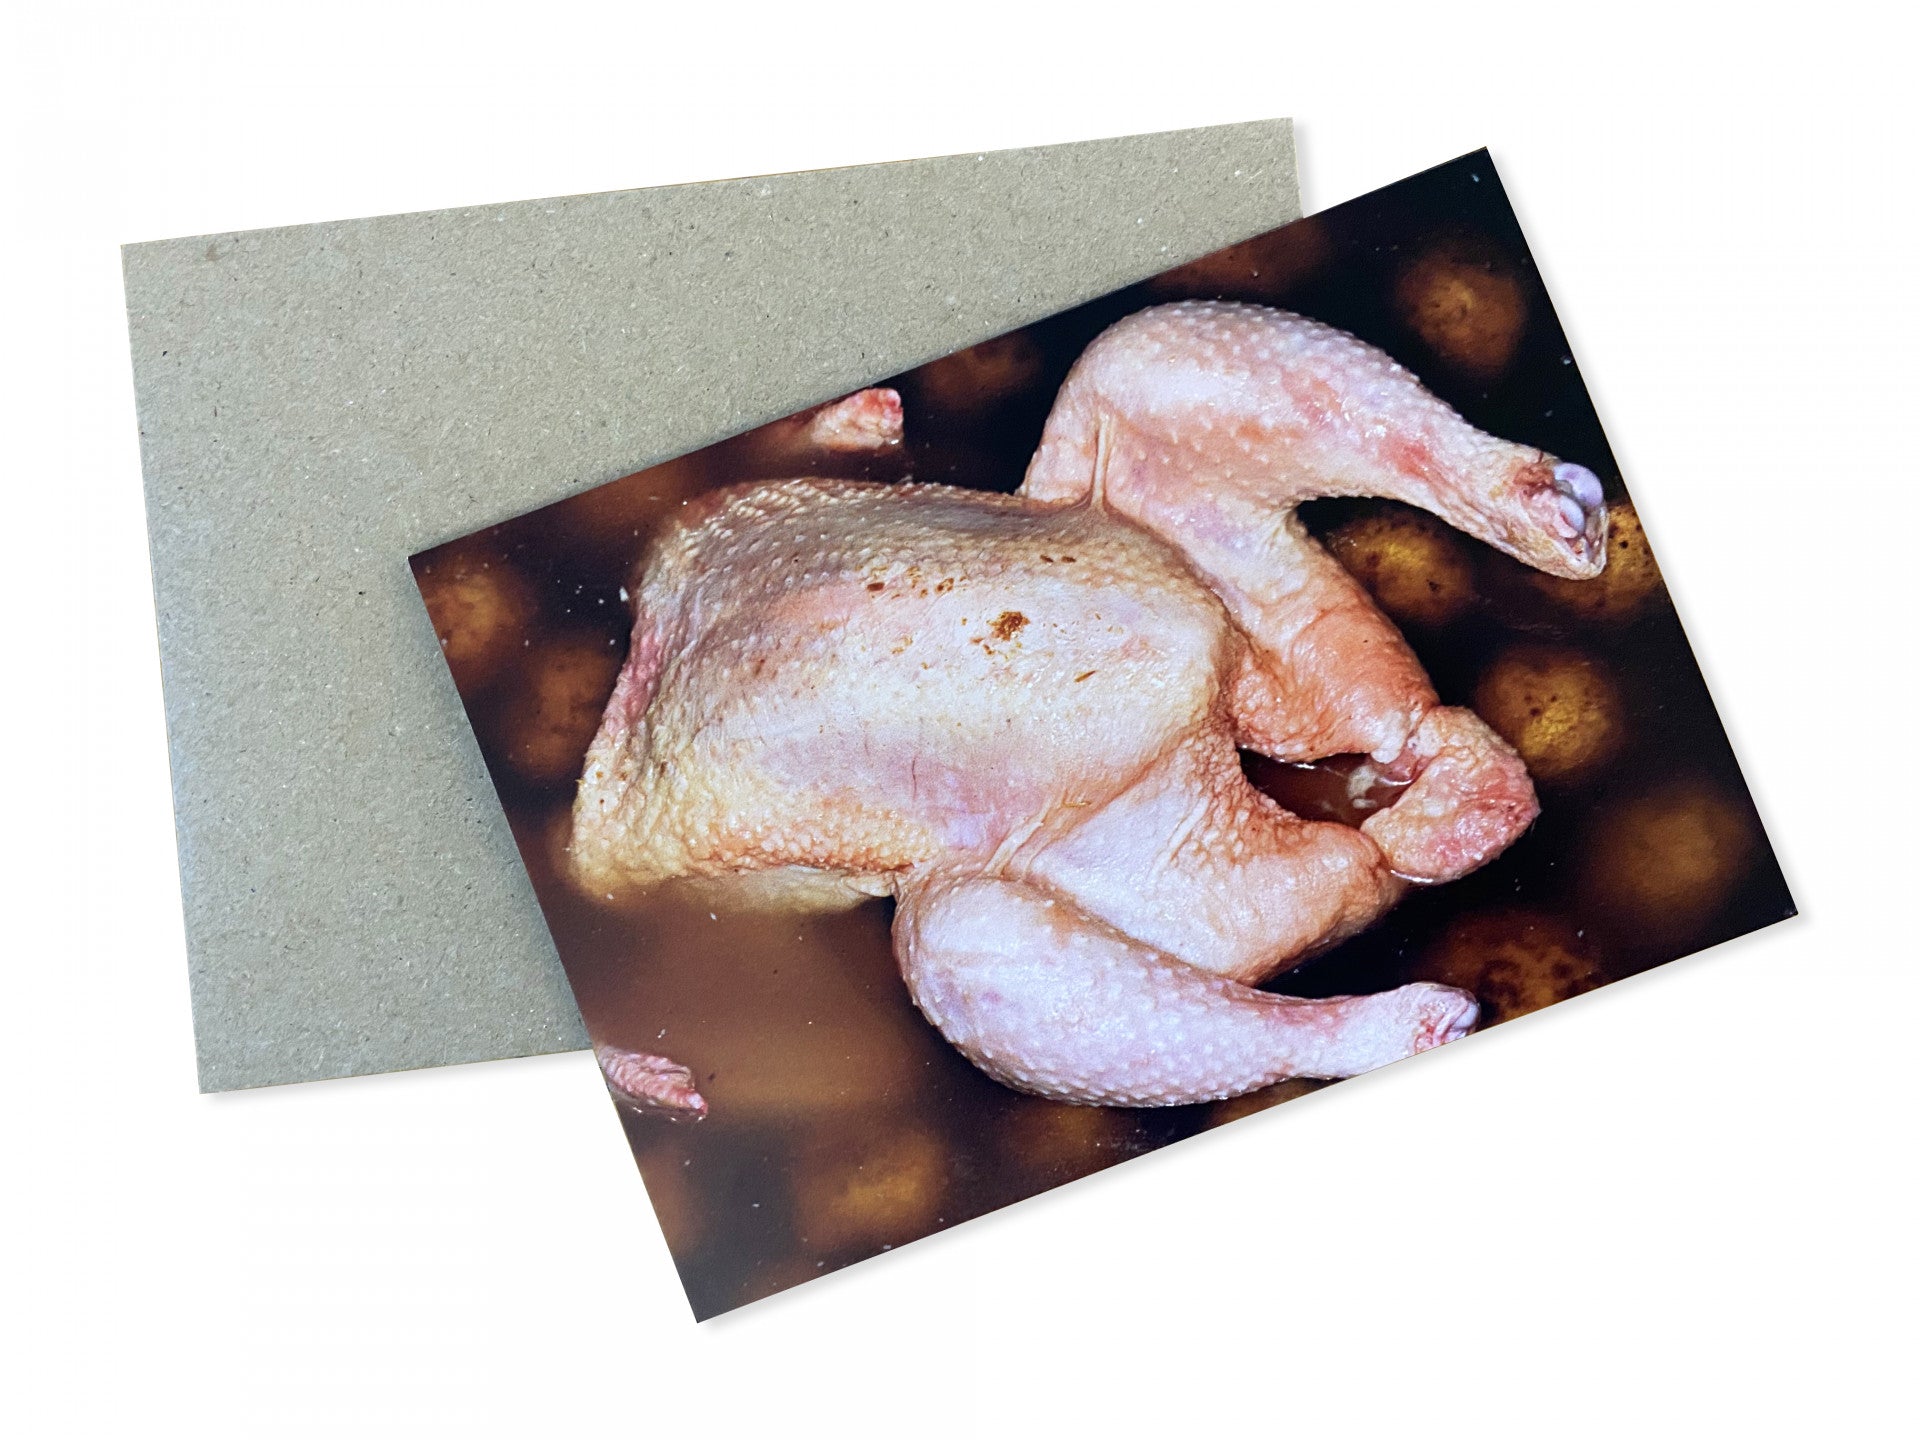 Martin Parr Christmas Cards (Poultry Edition)